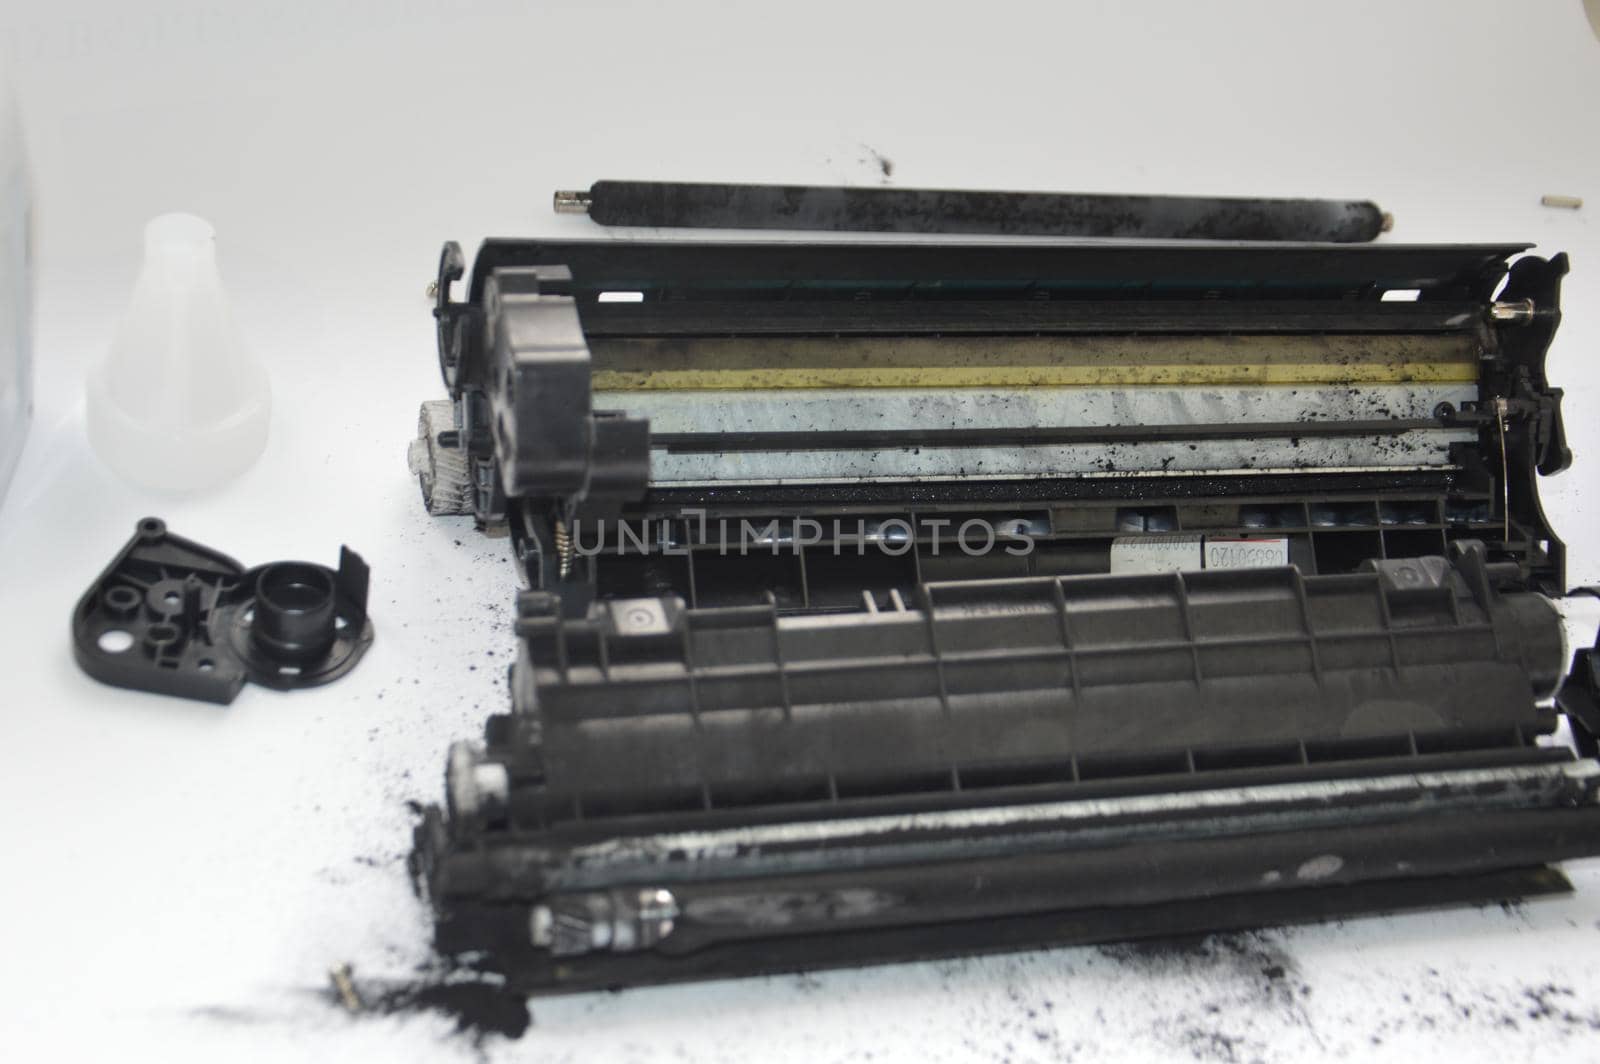 Charging the laser printer cartridge with toner the powder